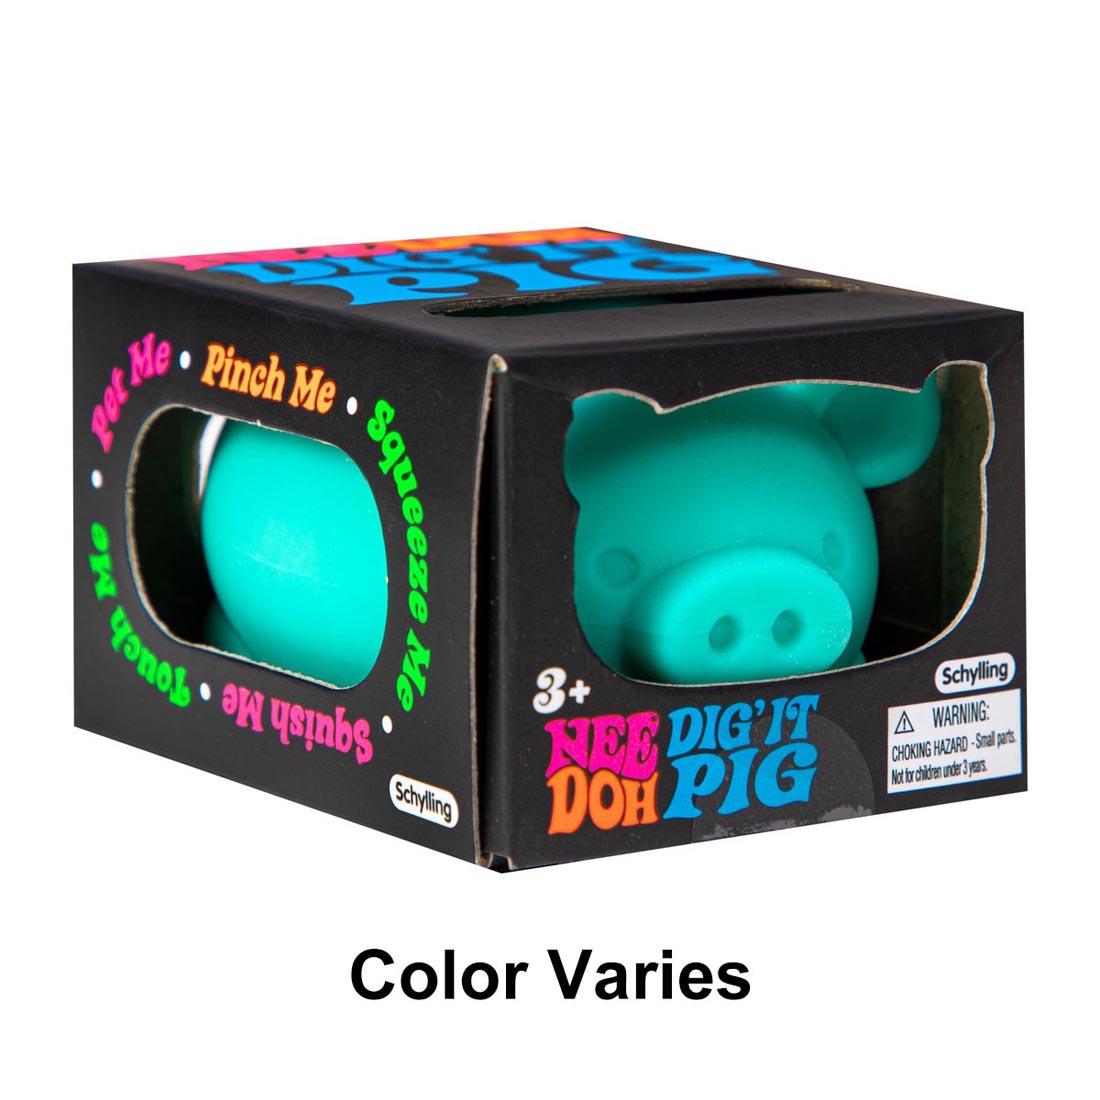 Nee Doh Dig It Pig with the text Color Varies